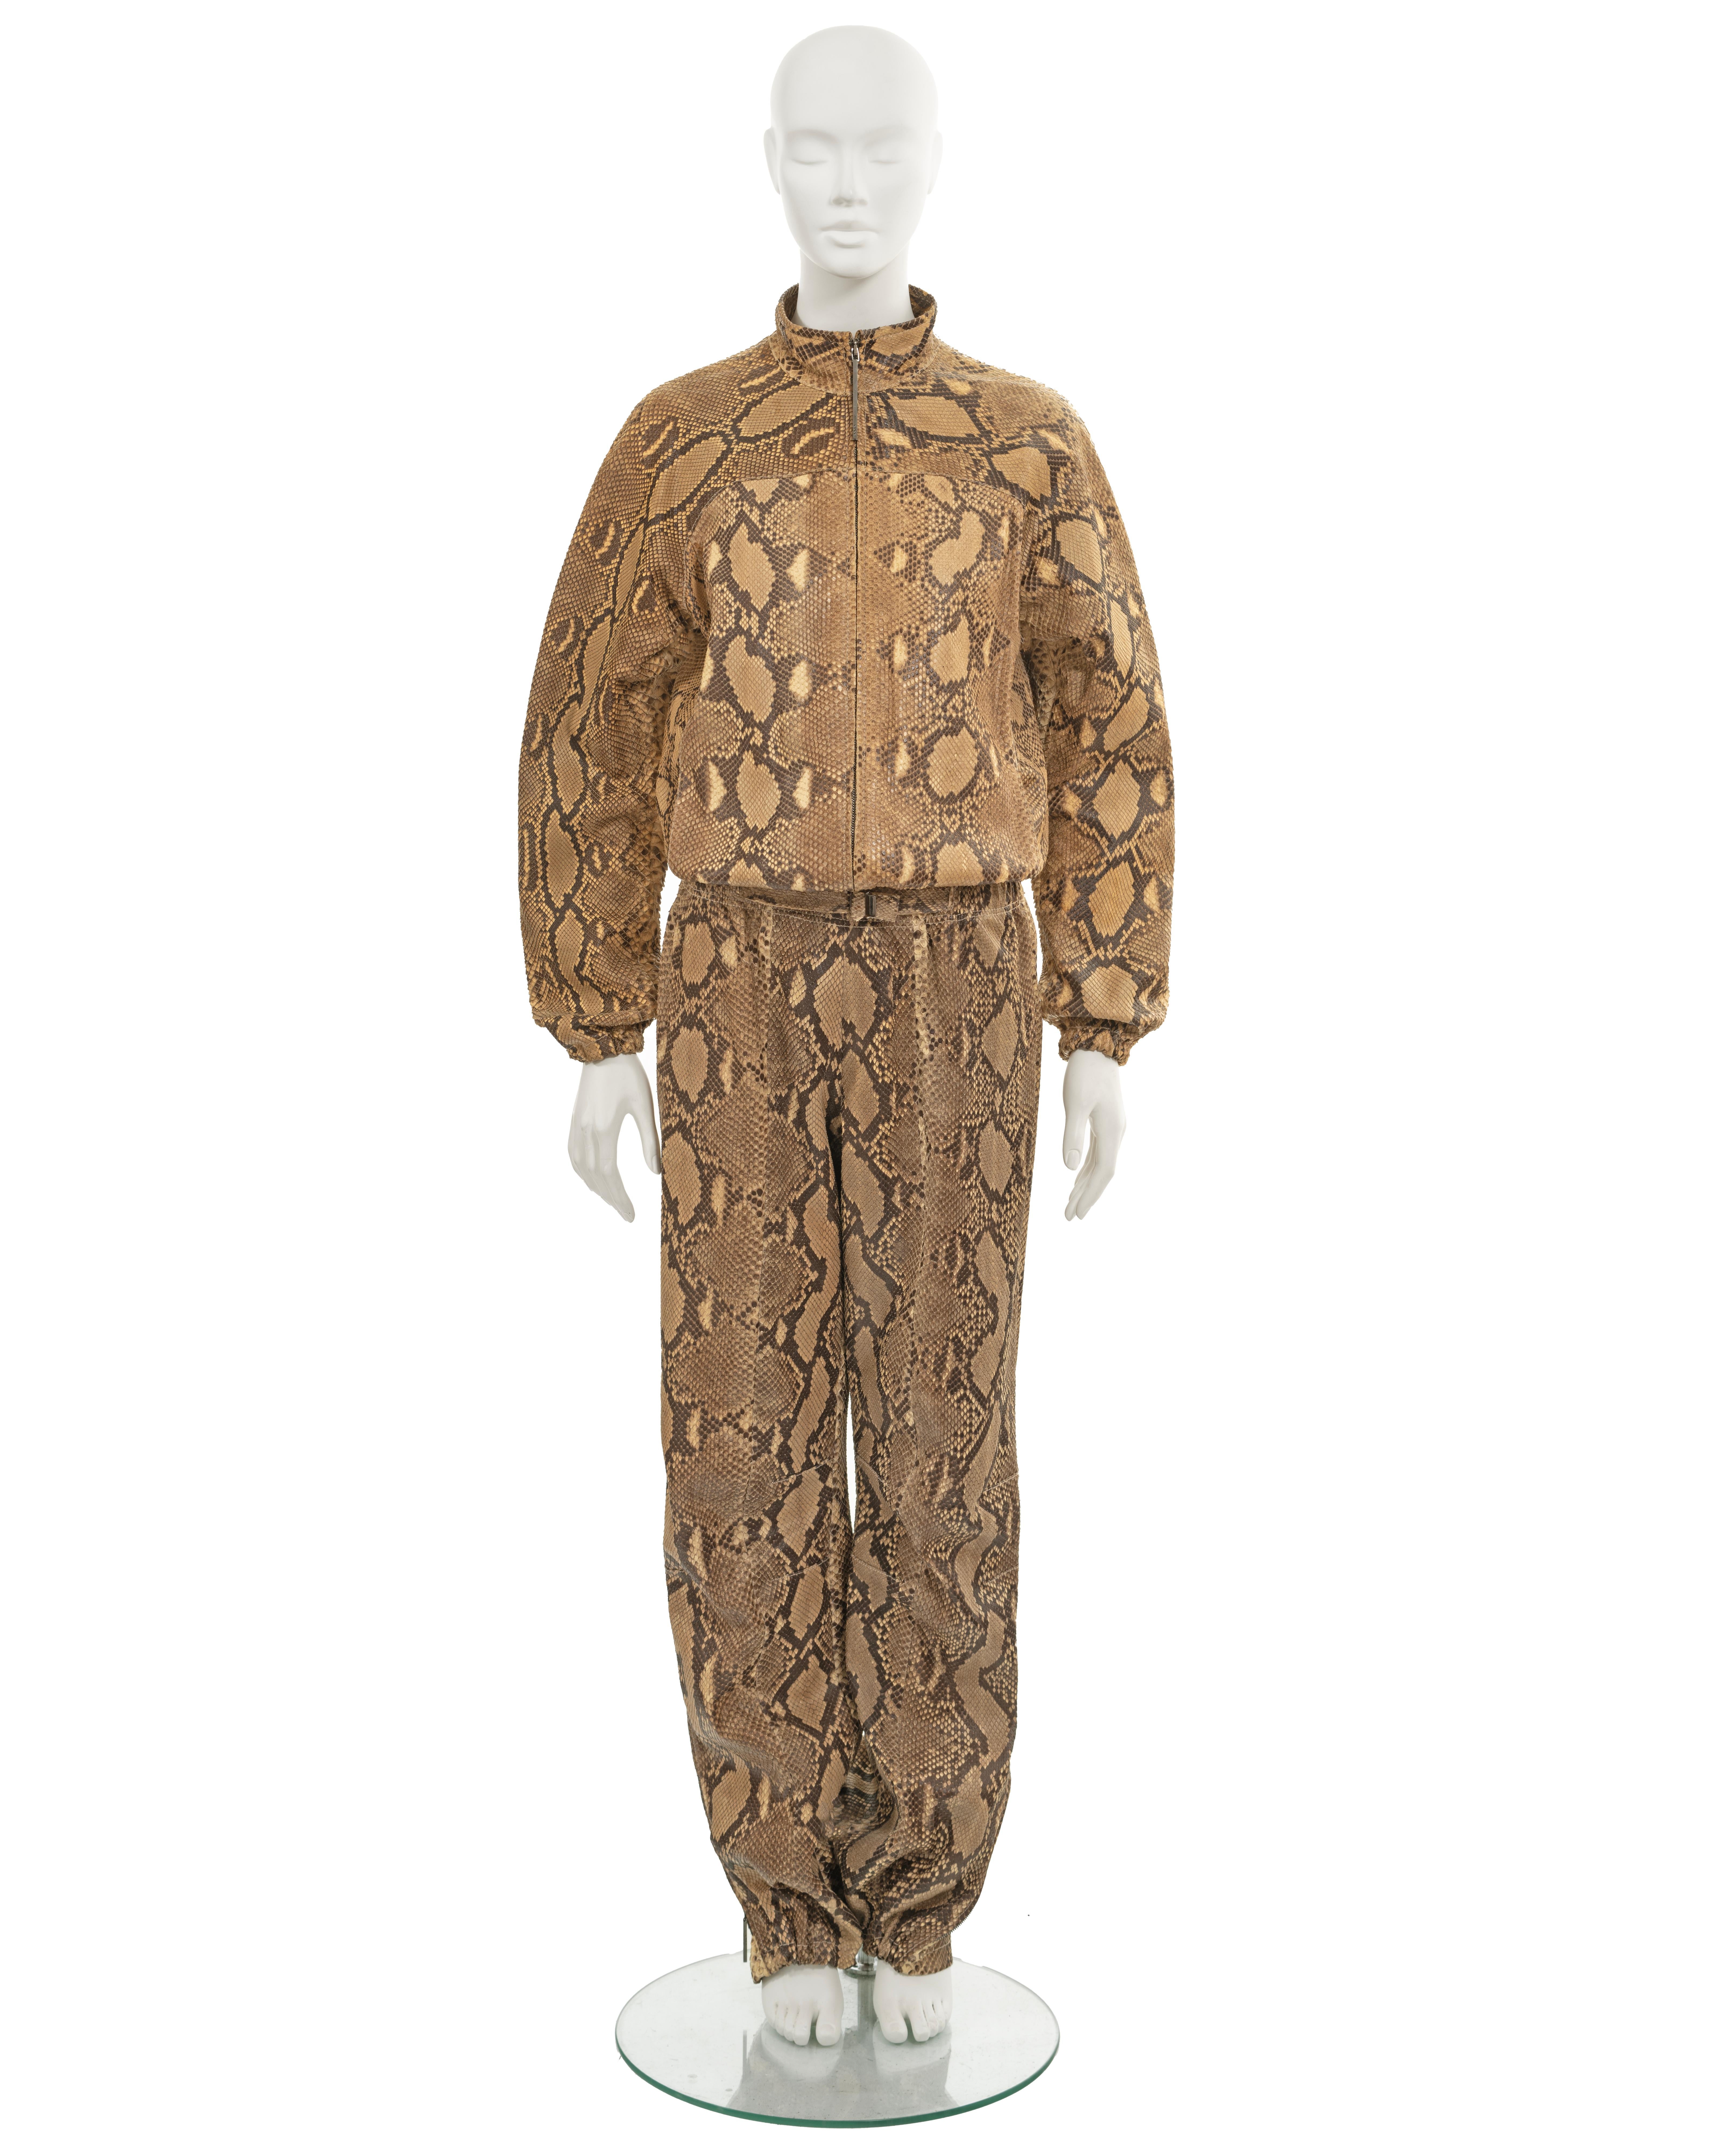 An Archival Gucci tracksuit from the Spring-Summer 2000 collection, designed under the creative direction of Tom Ford. This tracksuit is crafted from luxurious beige python skin, showcasing the exquisite materials used by Gucci during that era.

▪